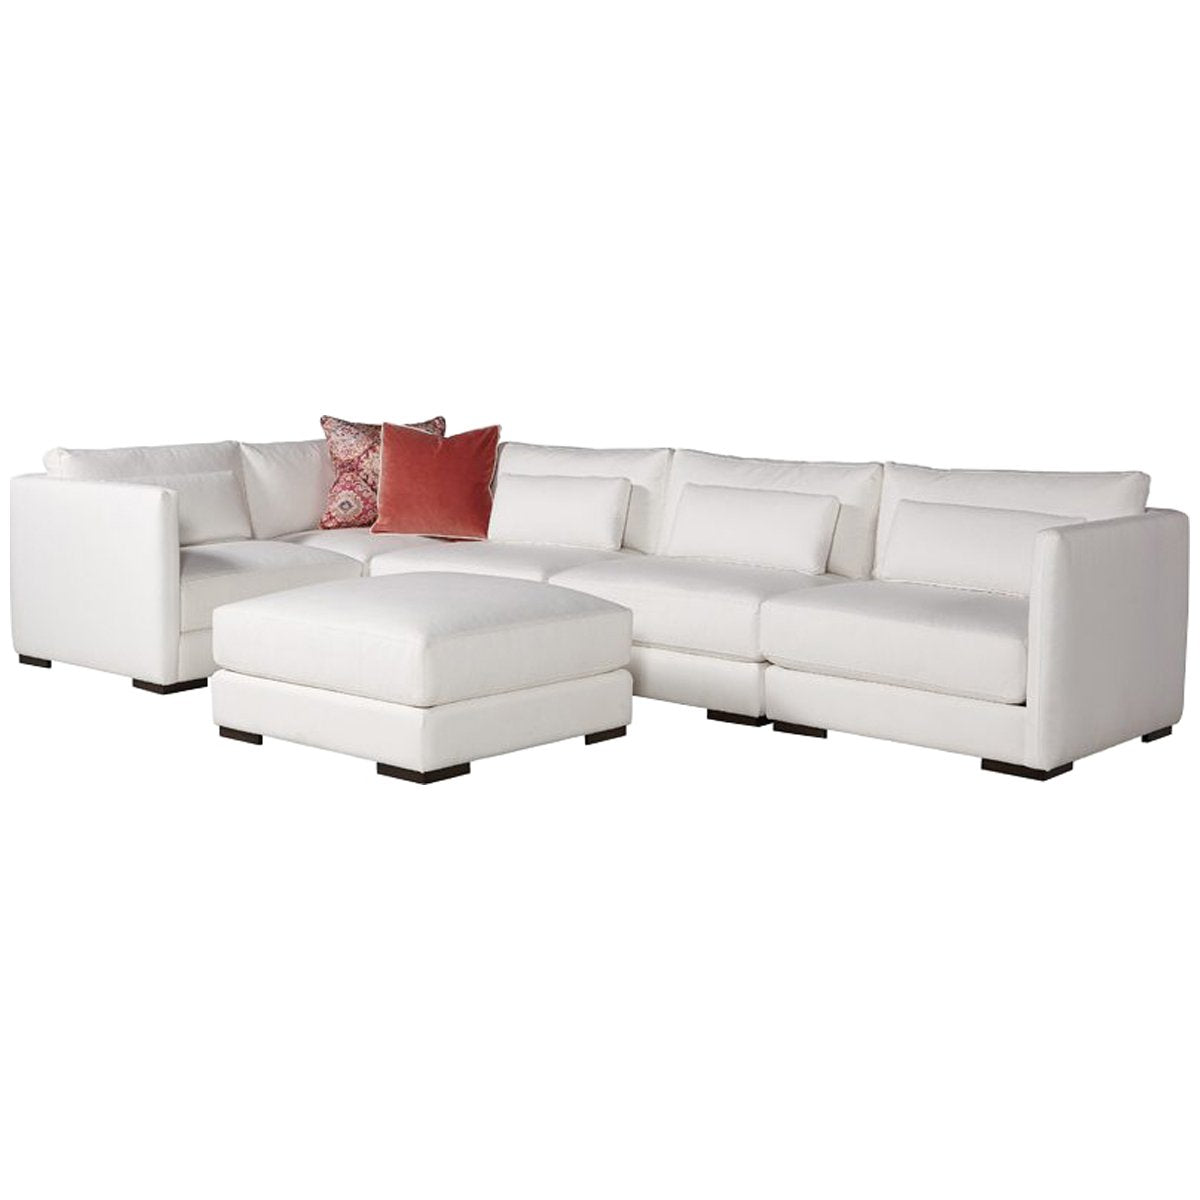 Lillian August Botero Six-Piece Sectional